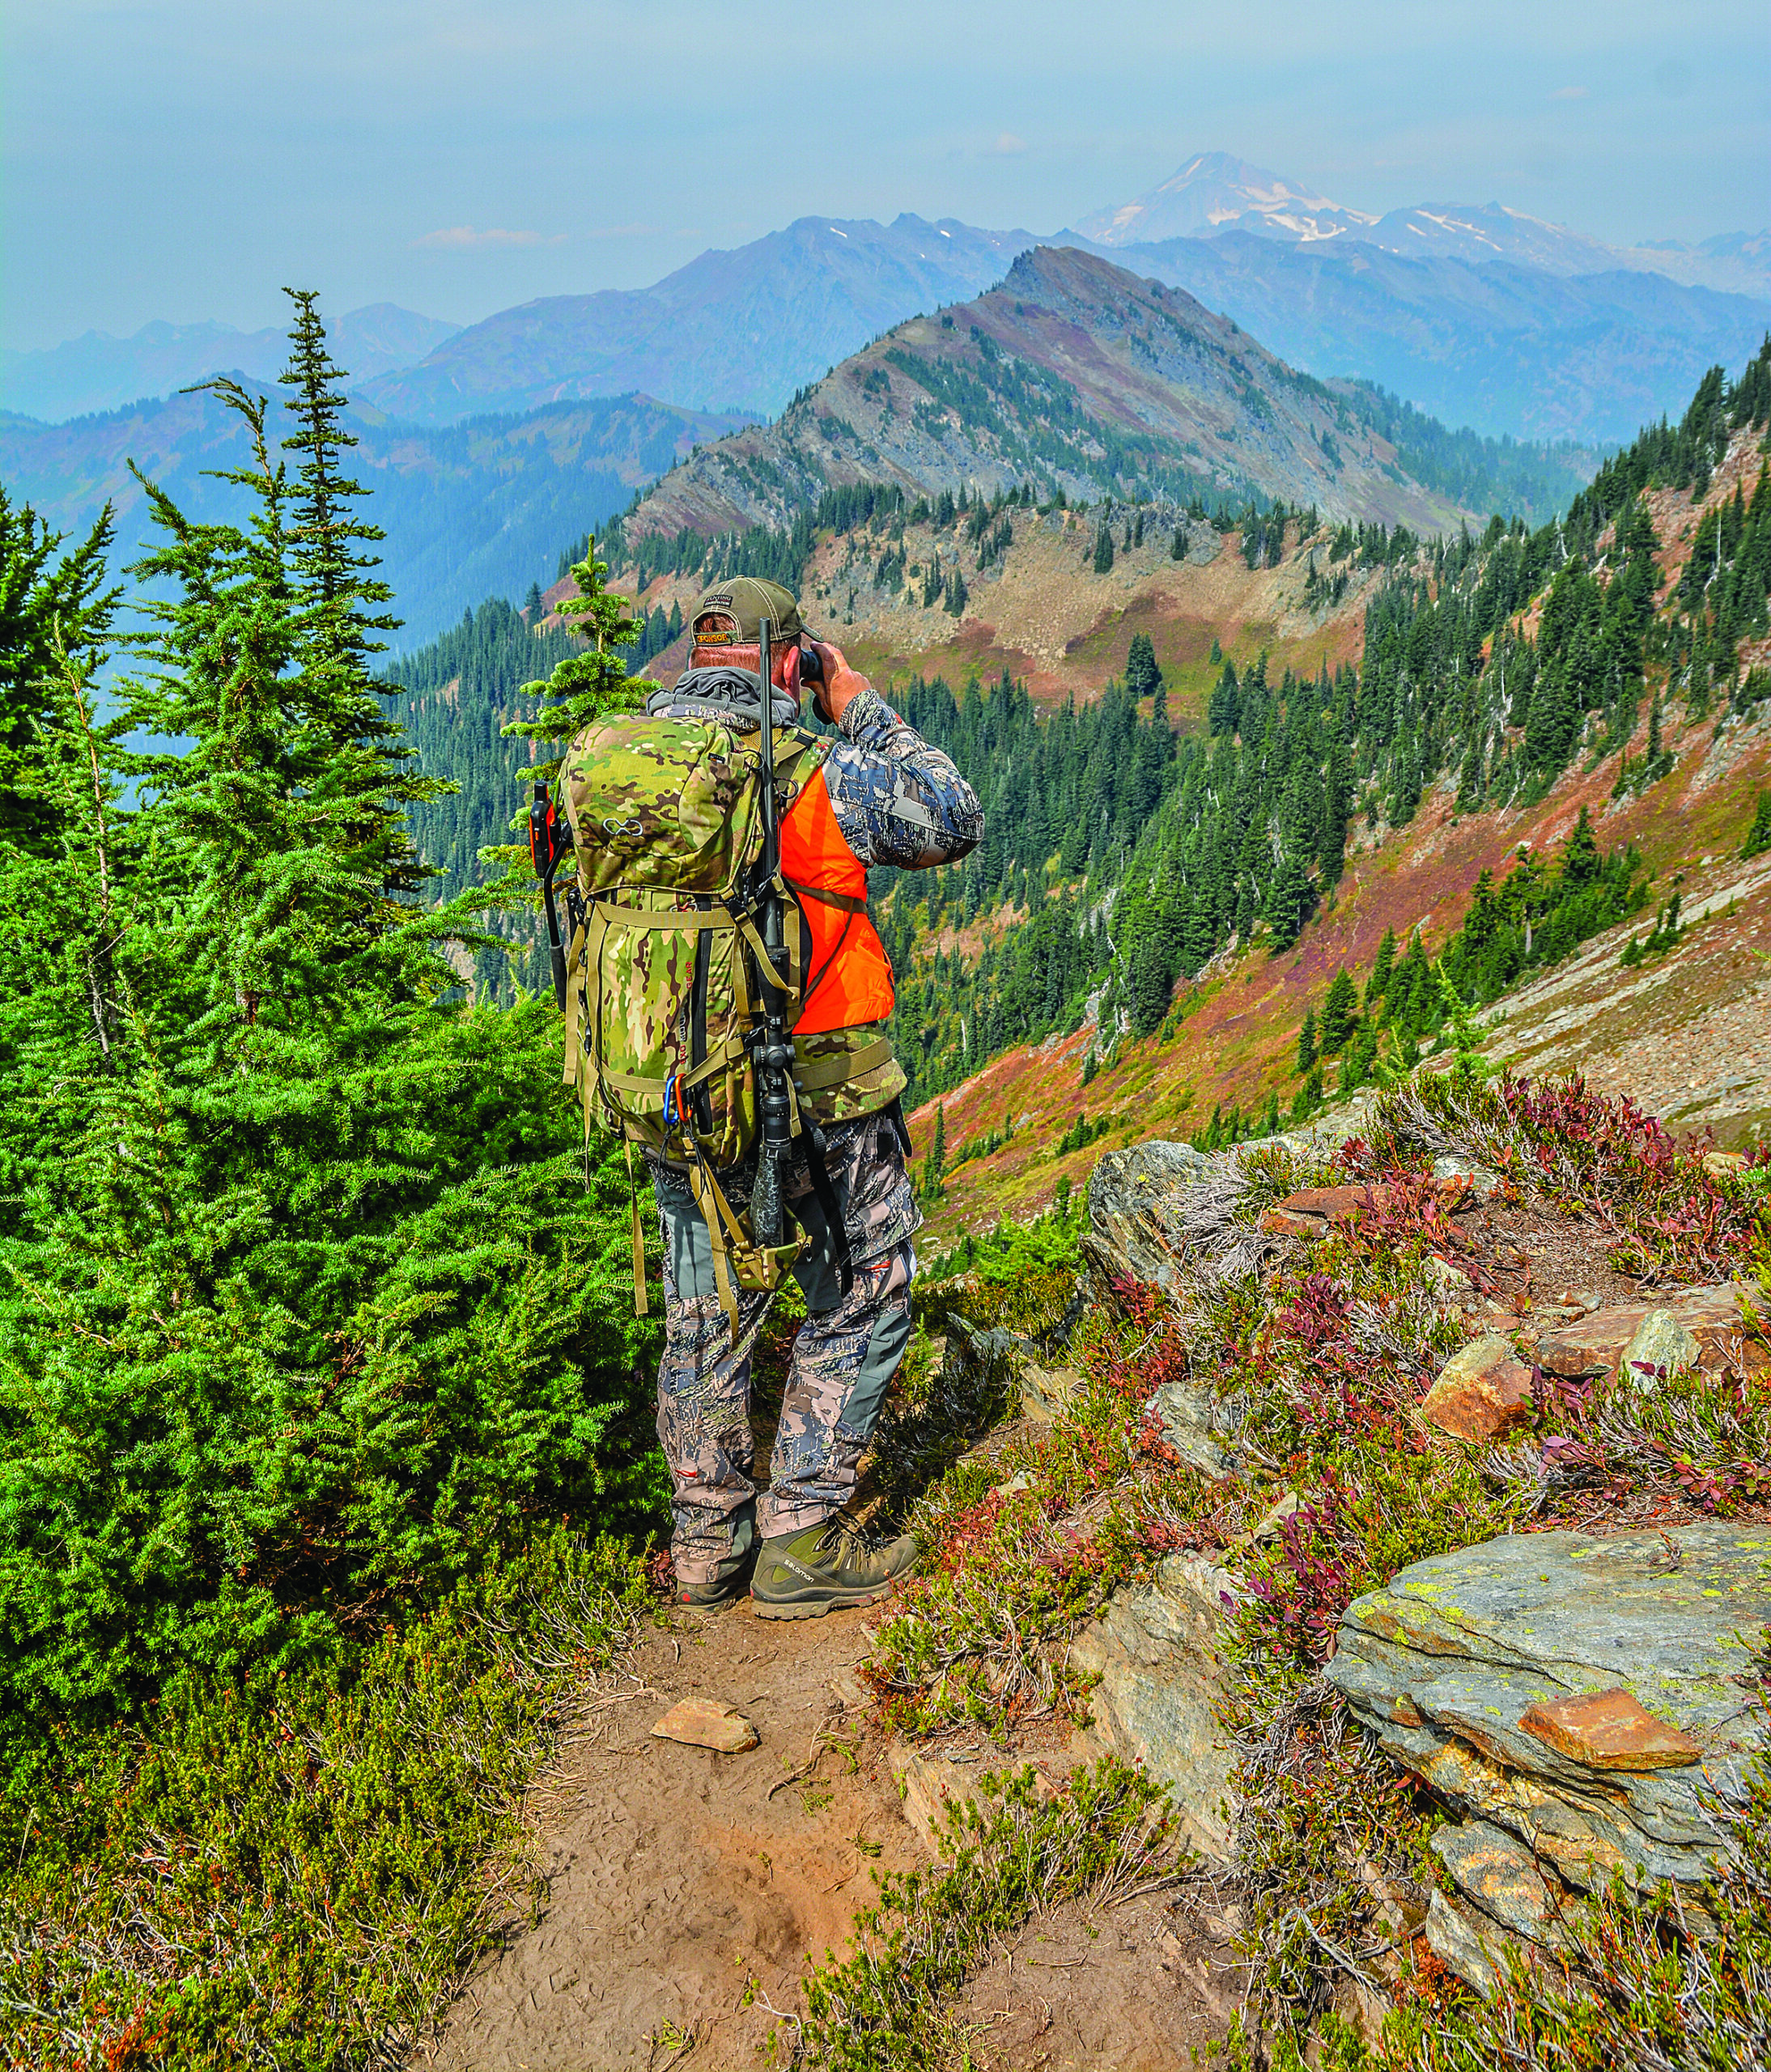 A hunter in blaze orange with a pack glassing in the mountains.